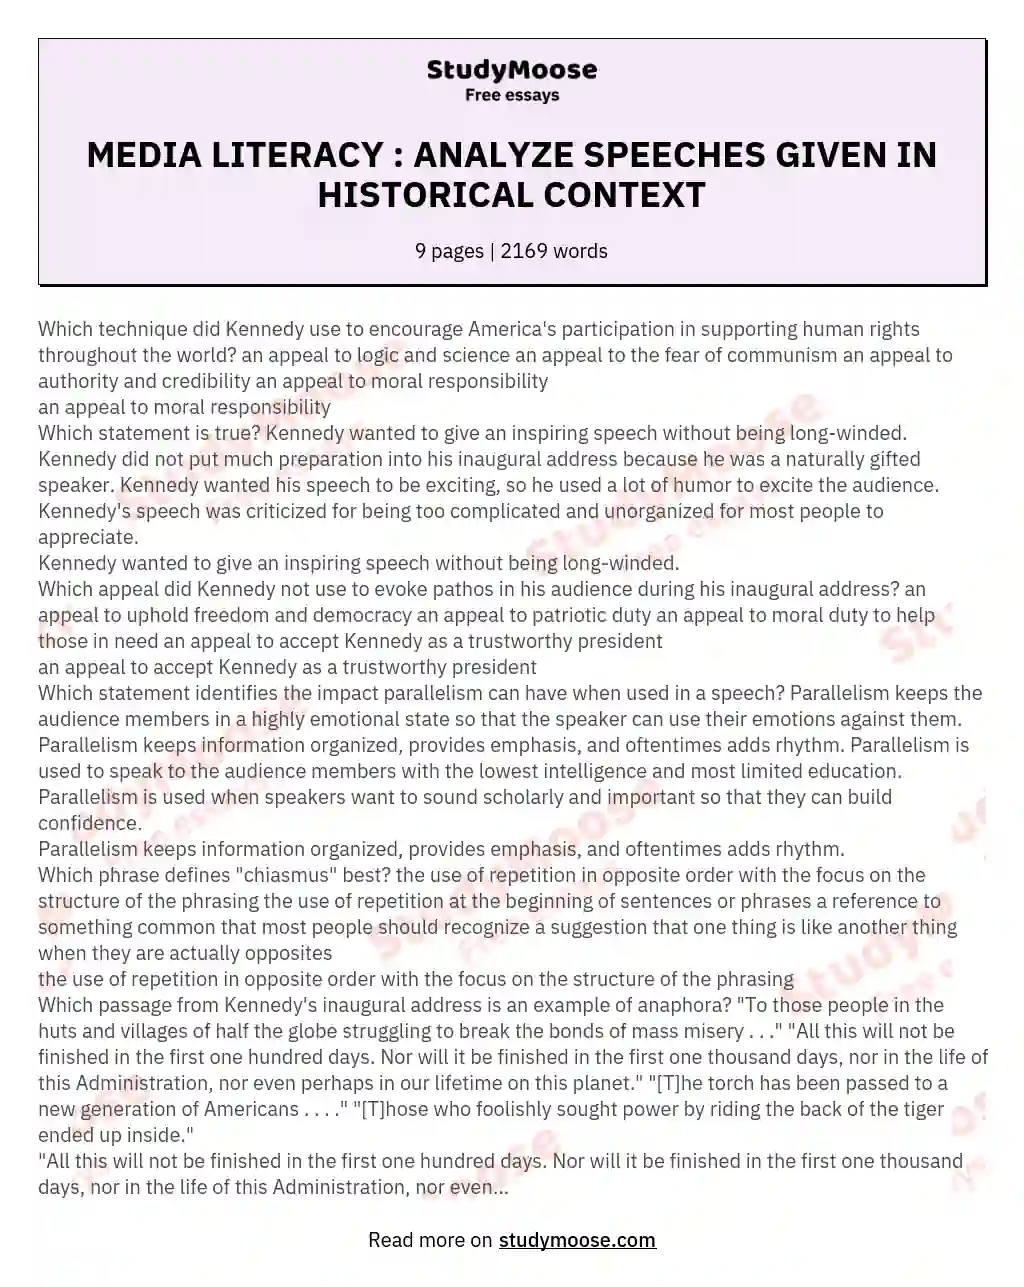 MEDIA LITERACY : ANALYZE SPEECHES GIVEN IN HISTORICAL CONTEXT essay